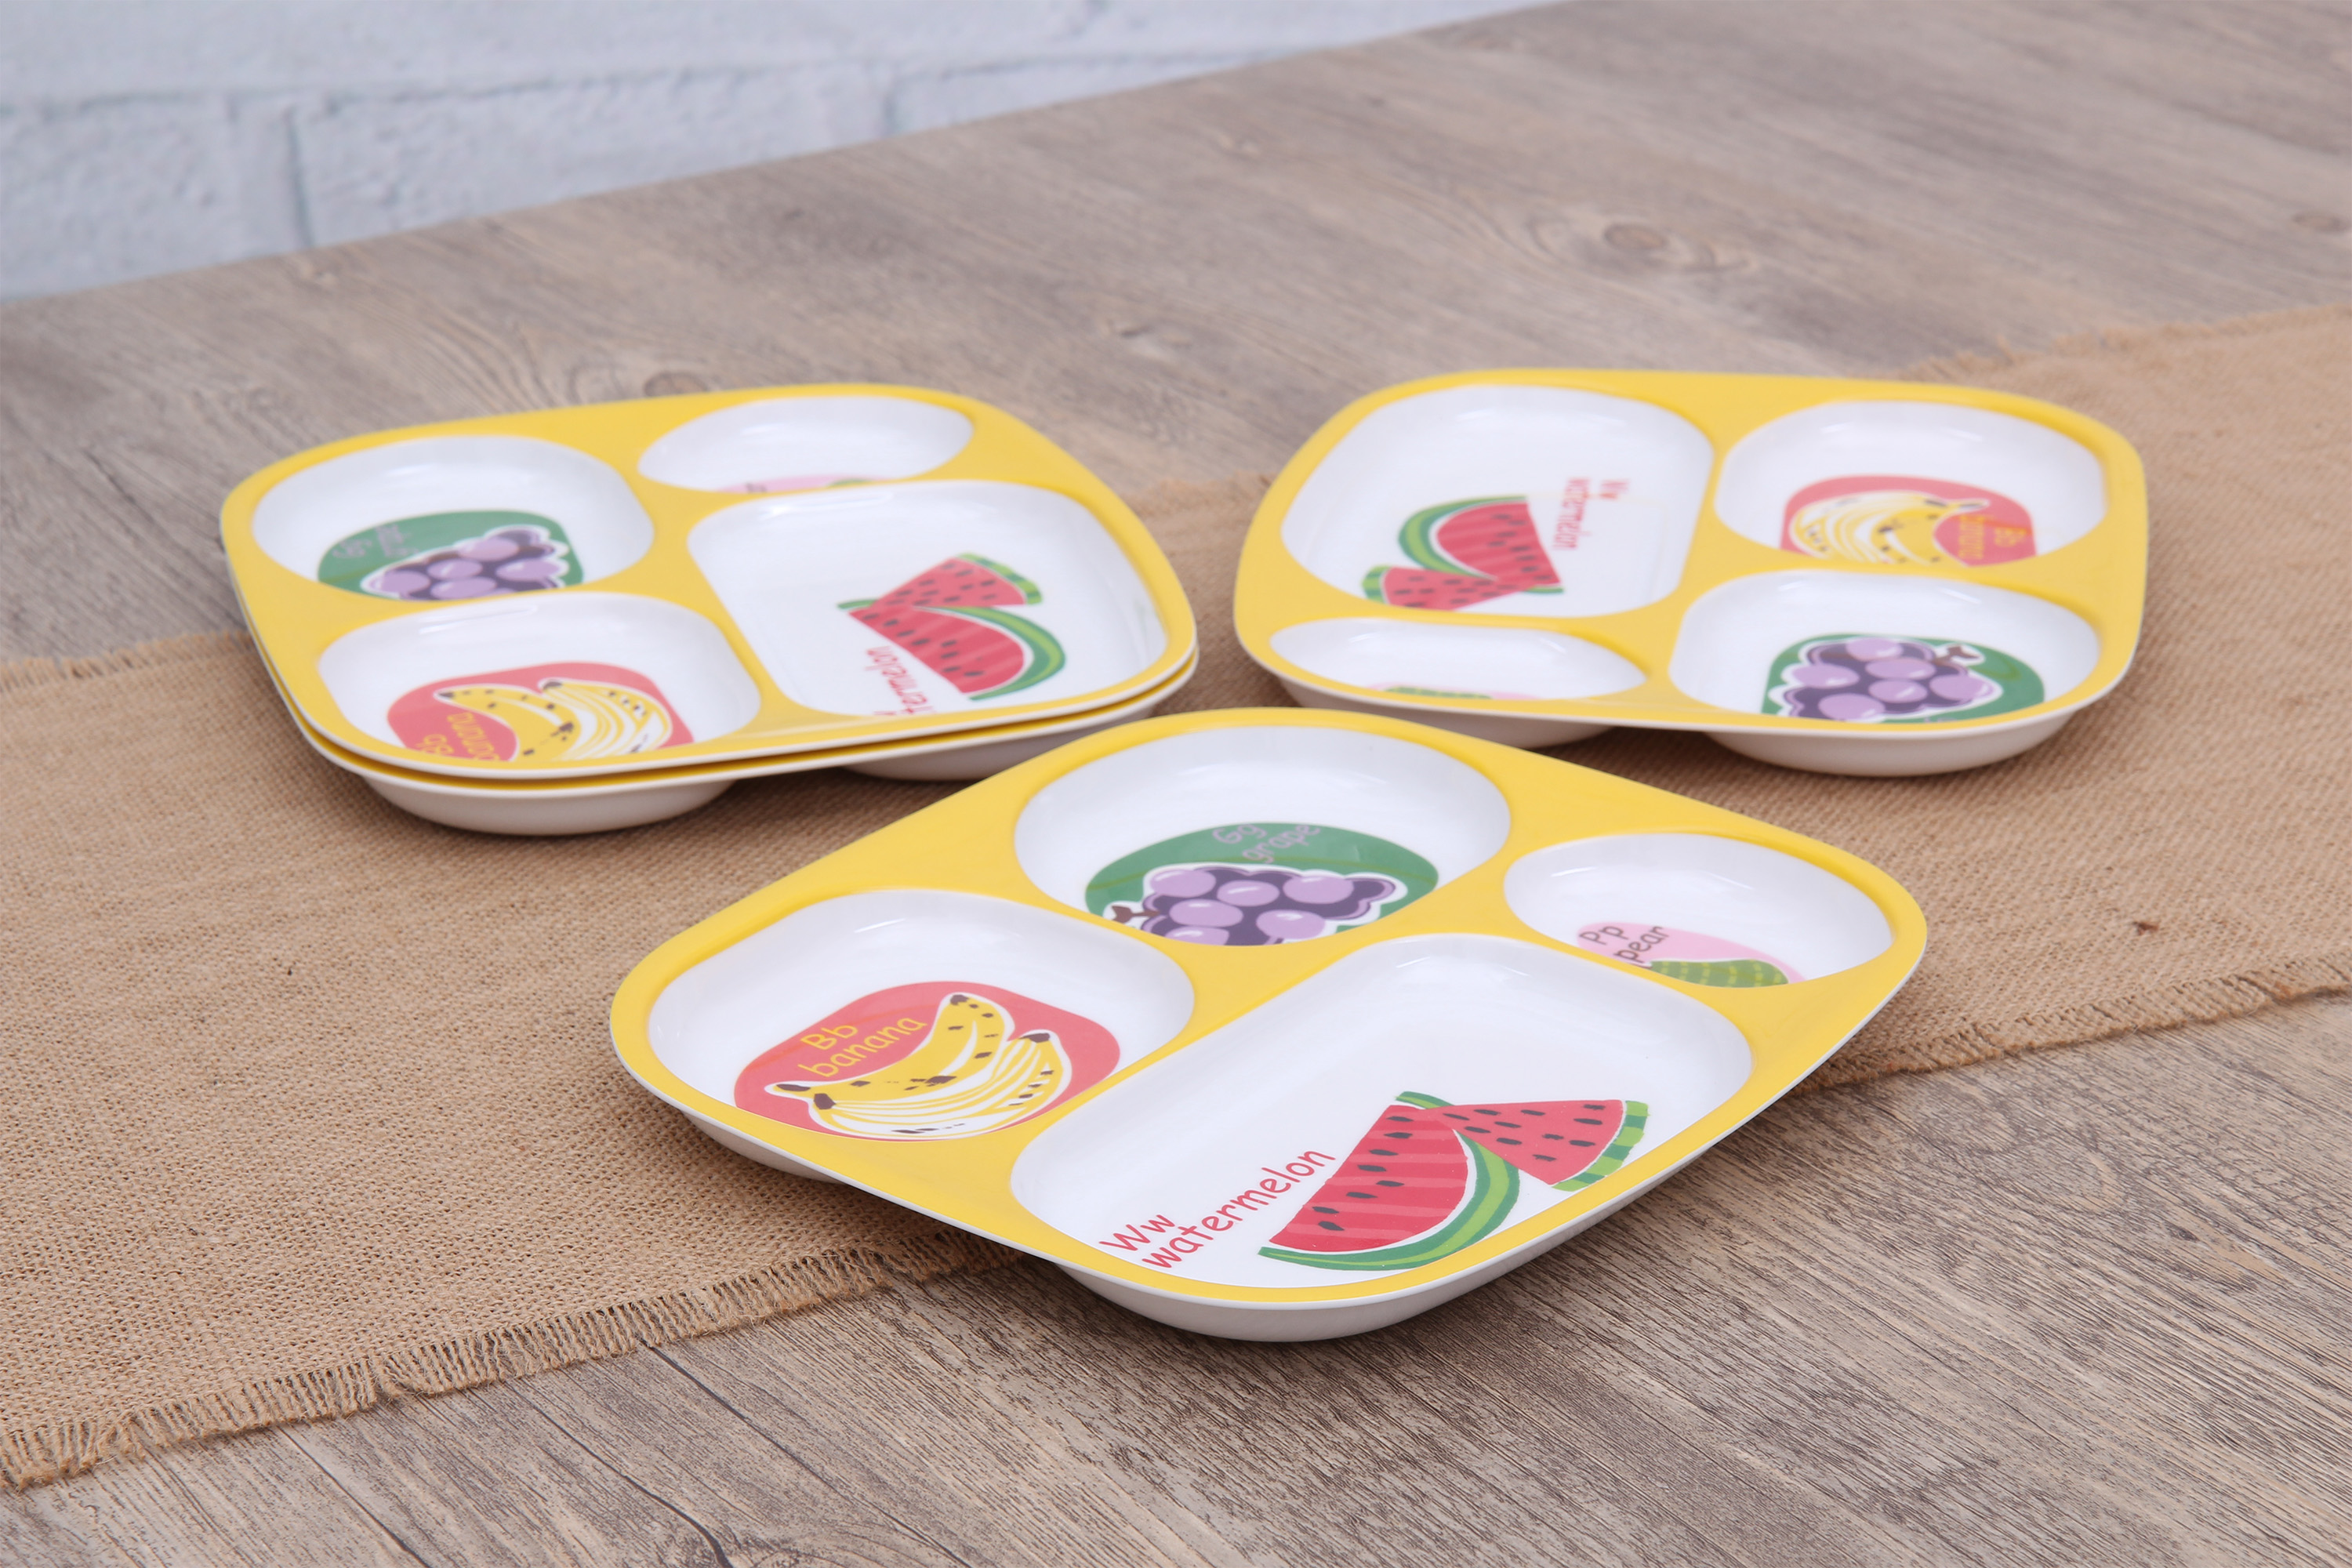 Mainstays Kids 4-Pack Melamine Divided Plates, ABC's of Health - image 2 of 6